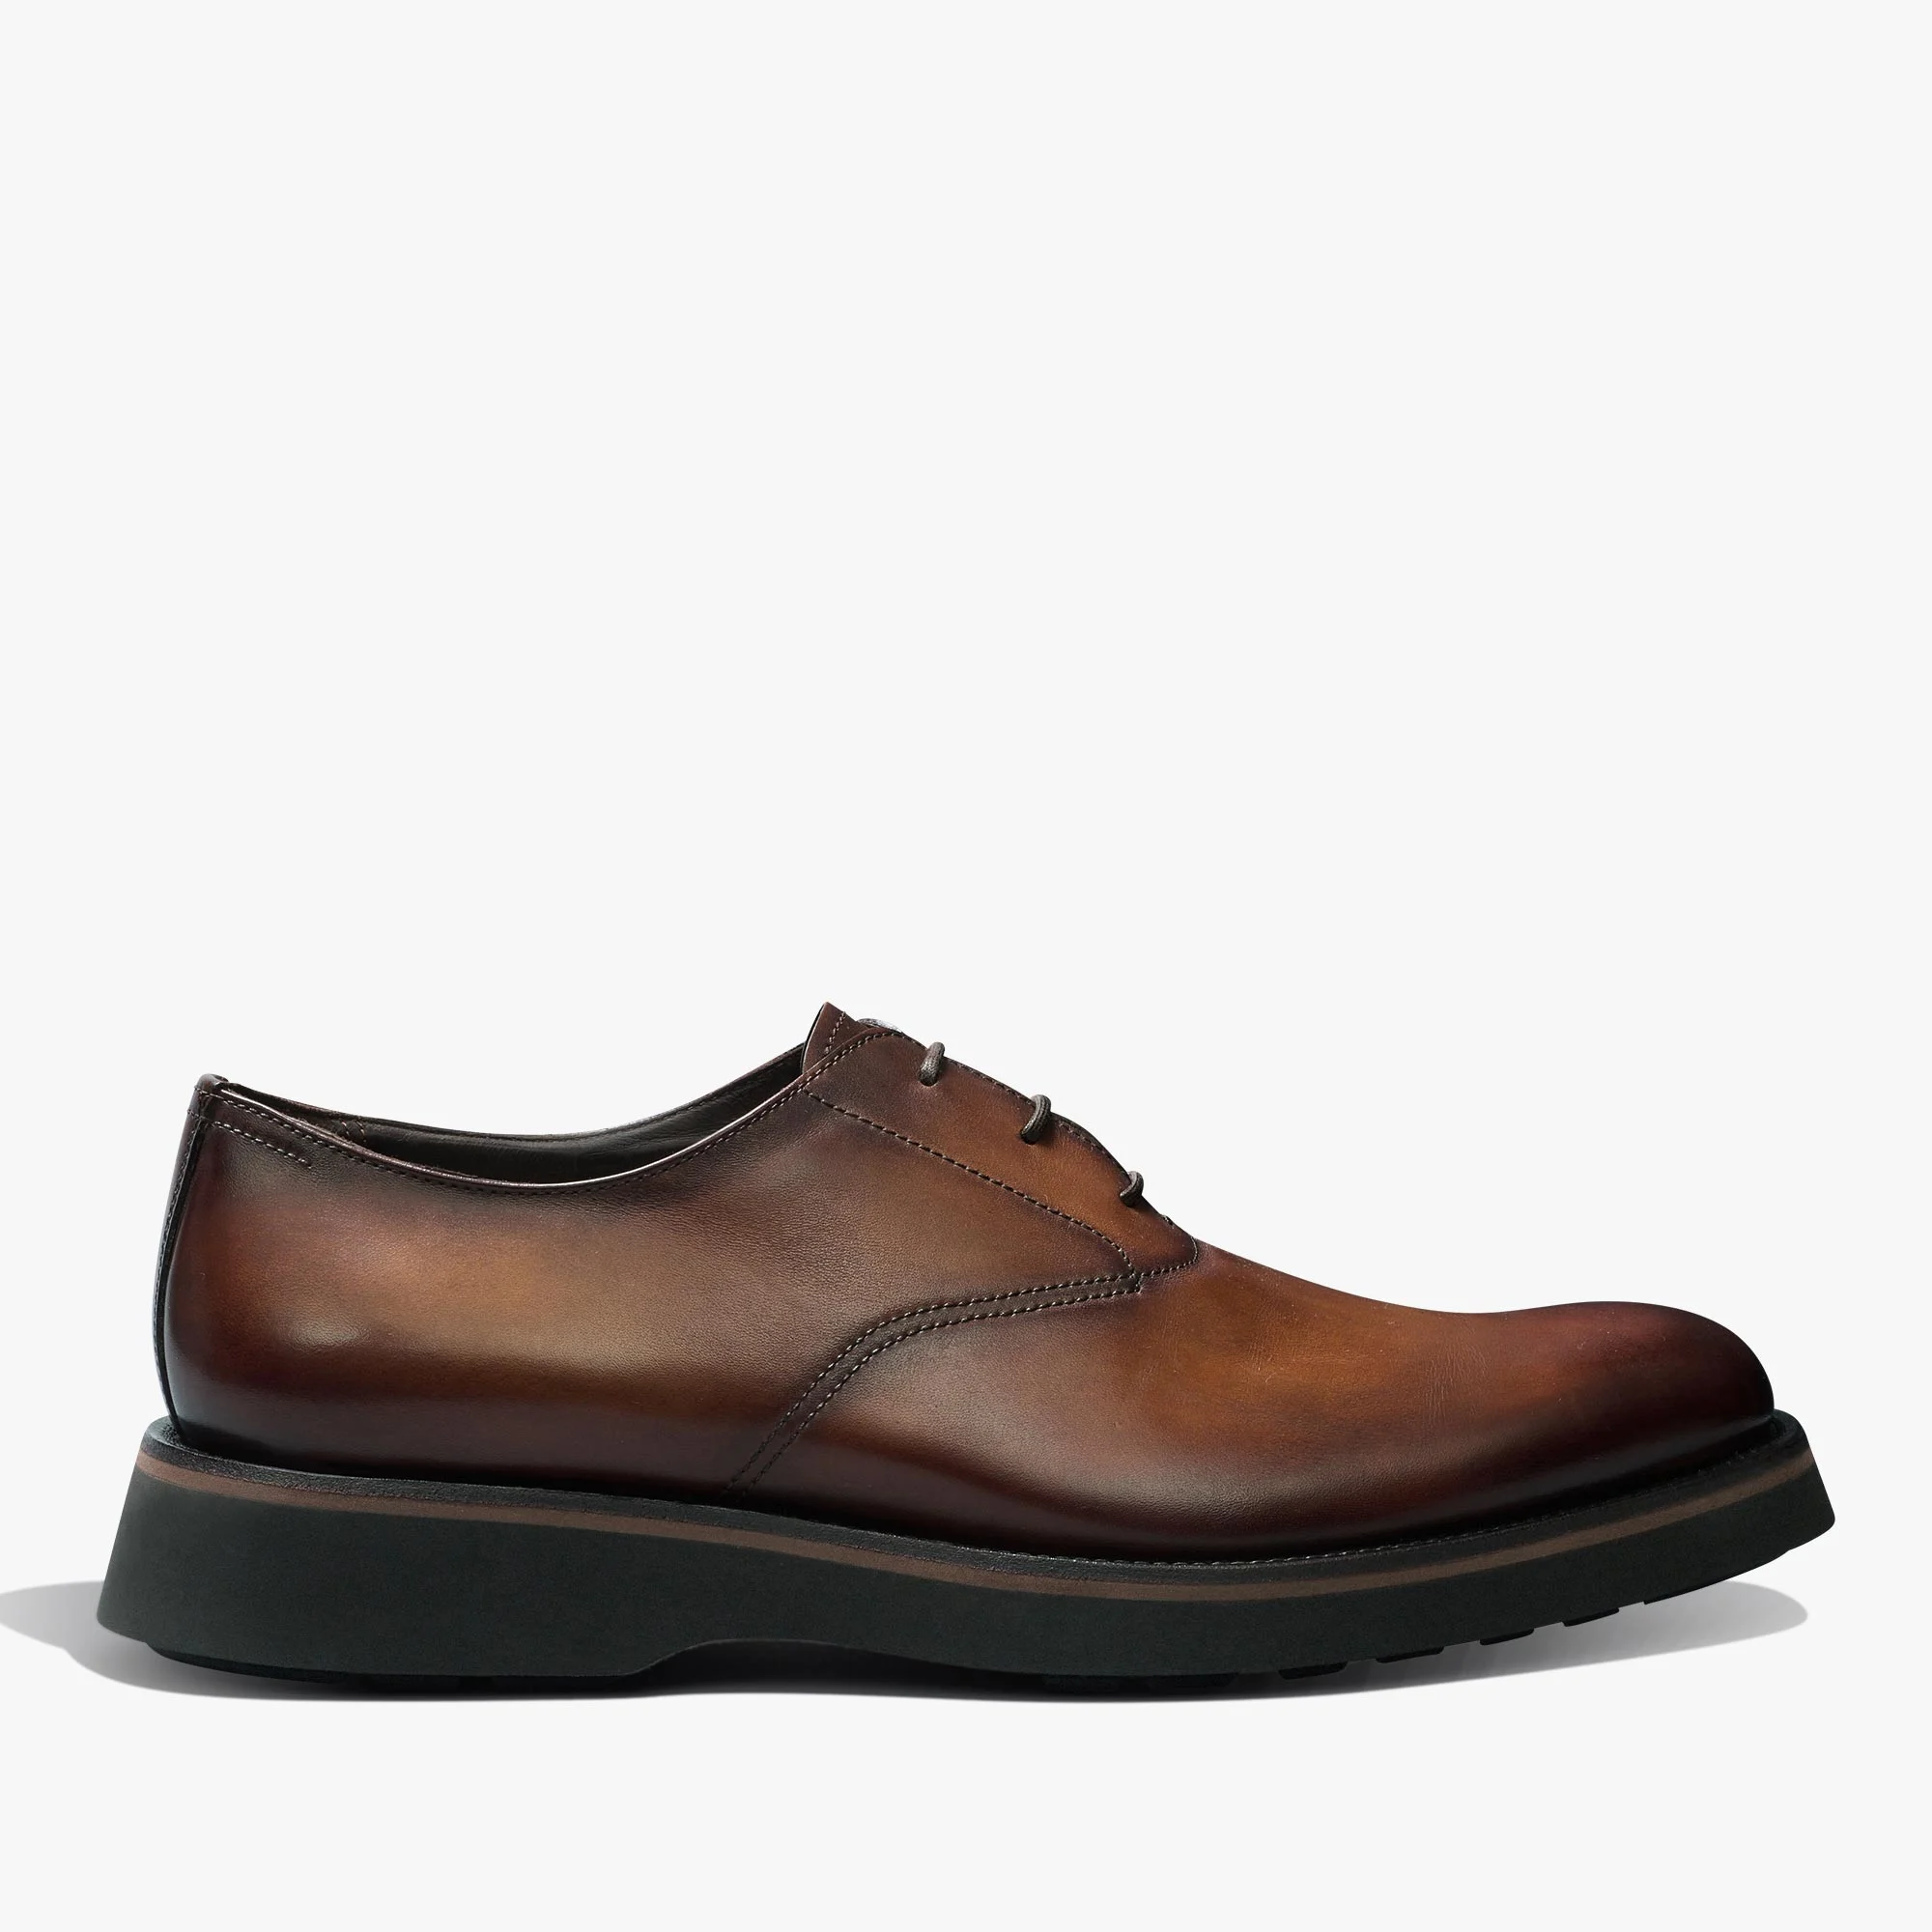 Alessio Leather Oxford, CACAO INTENSO, hi-res